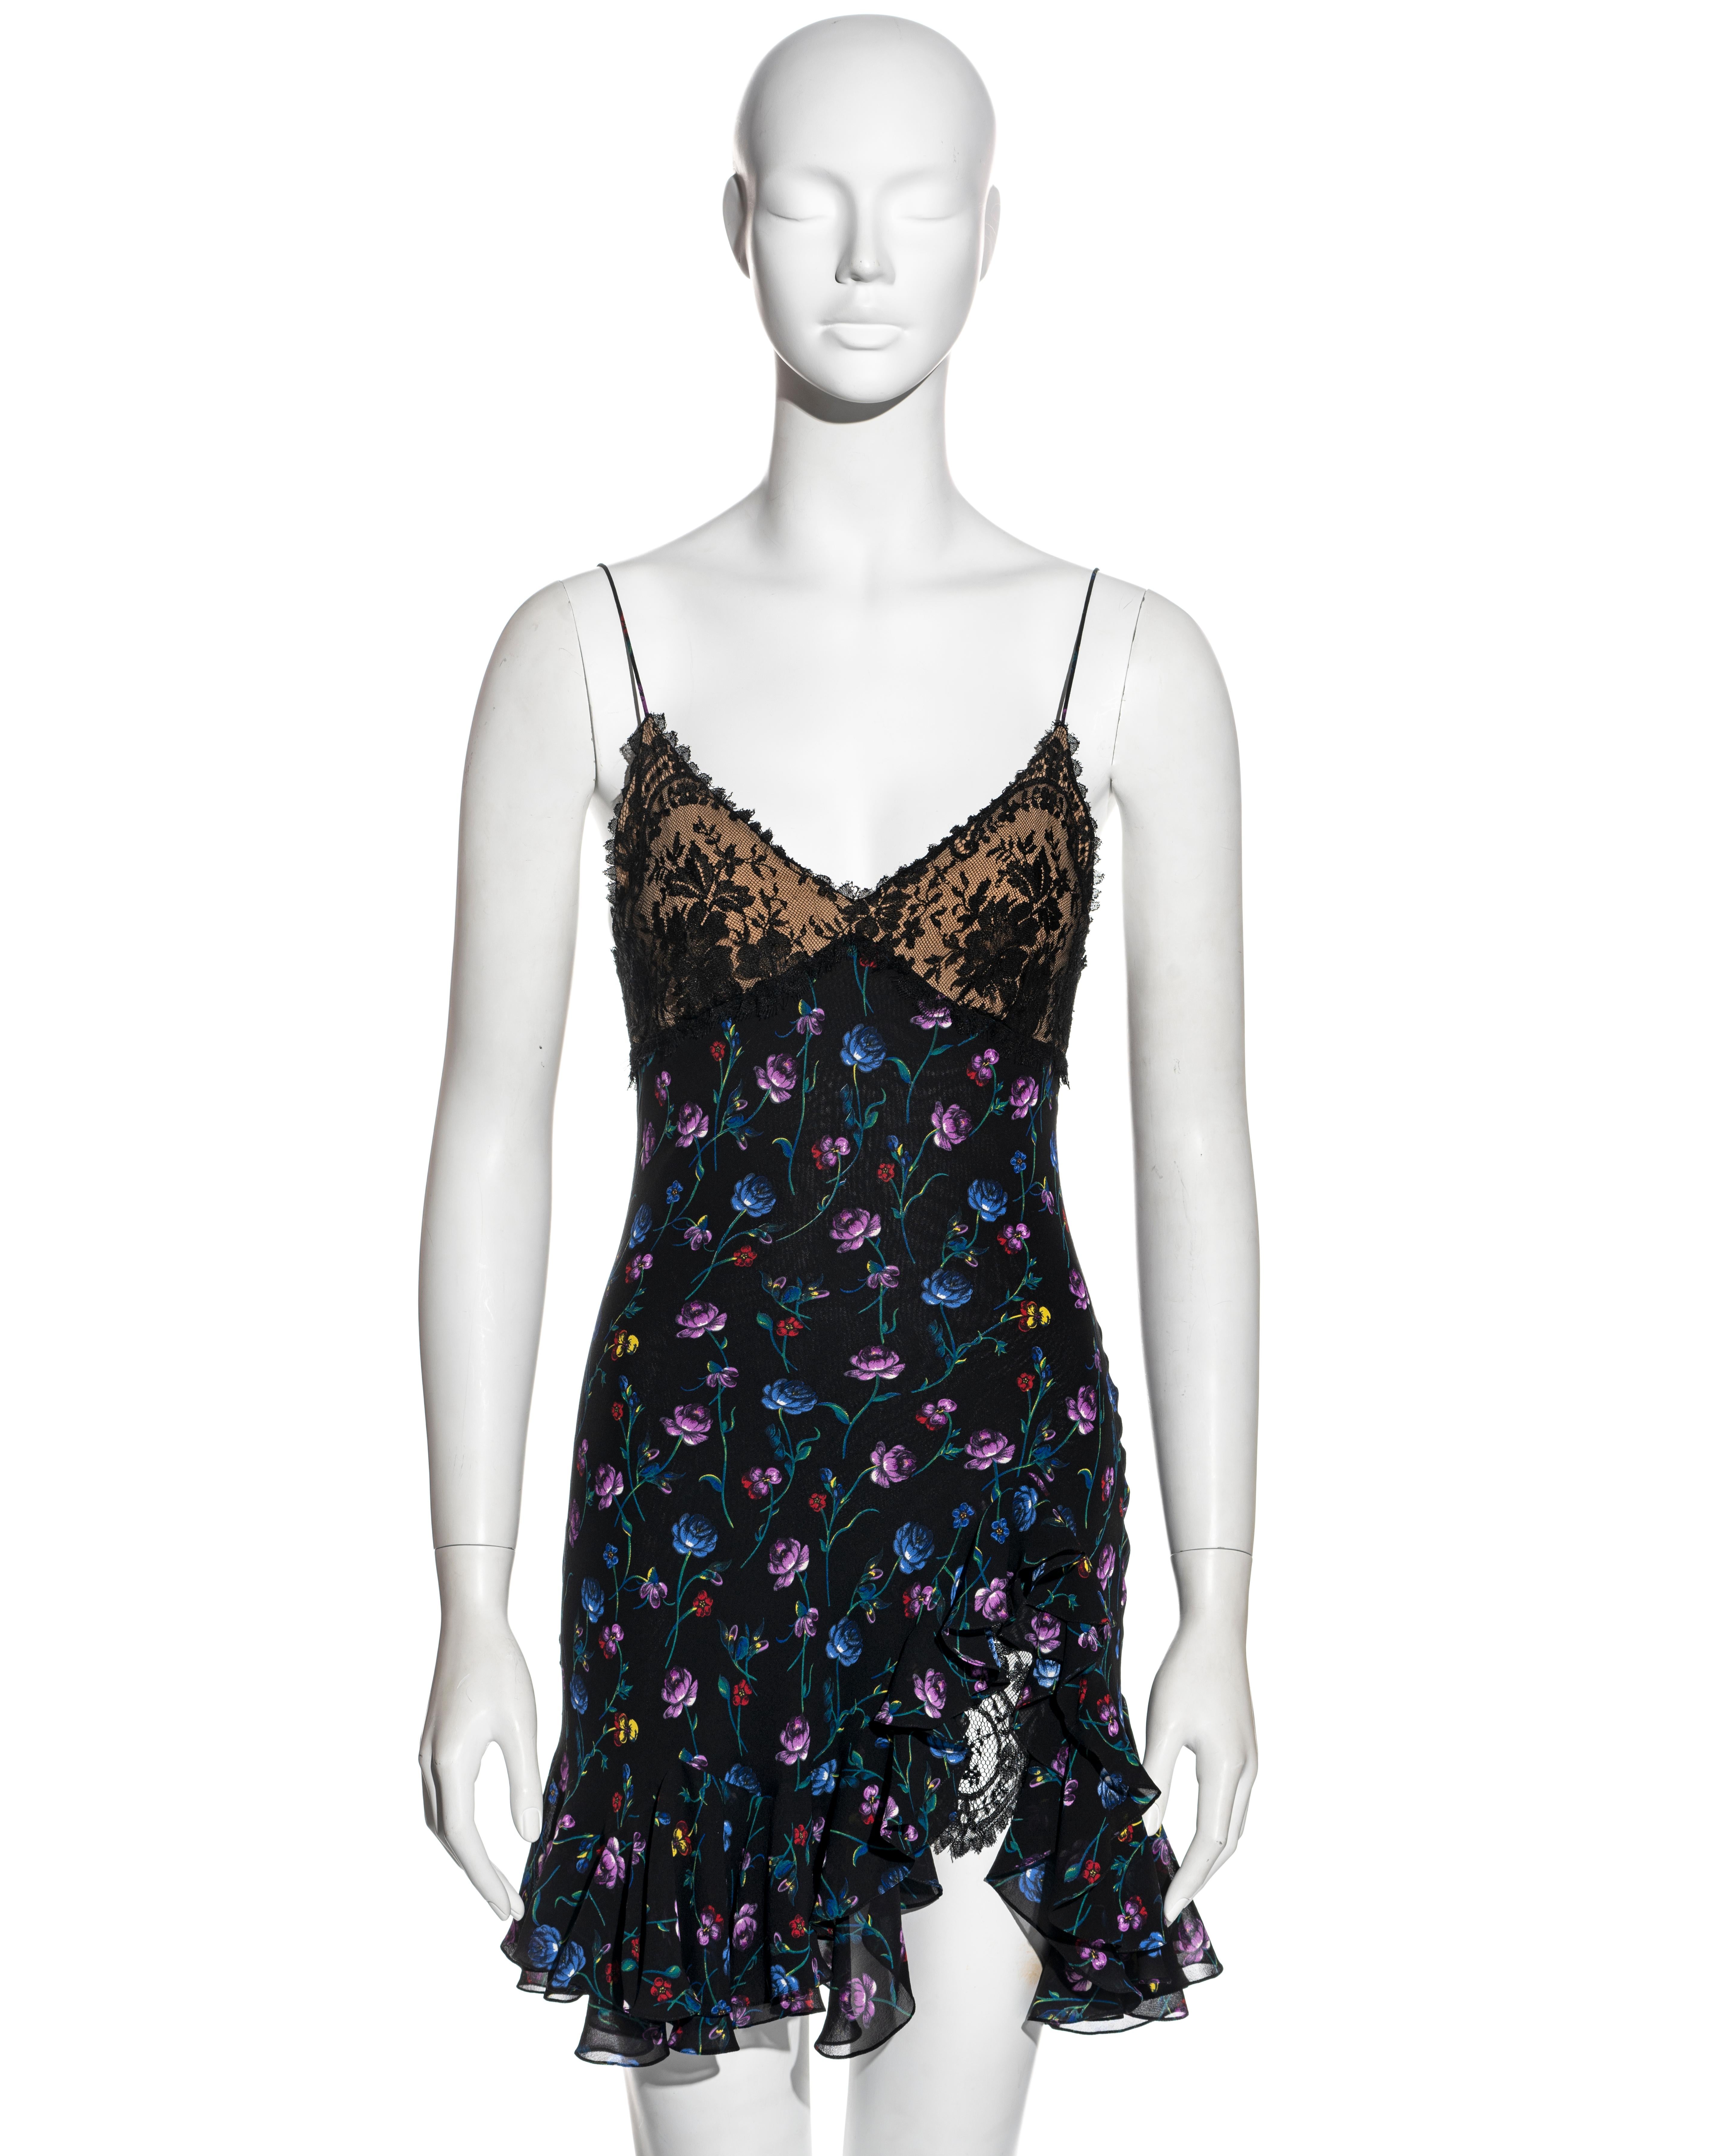 ▪ Rare John Galliano ivory silk jacquard mini slip dress 
▪ Blue, purple, yellow and red floral print with black base  
▪ Breast cups with Chantilly lace overlay  
▪ Spaghetti straps  
▪ Bias-cut  
▪ Flounce mini skirt with two layers  
▪ High leg